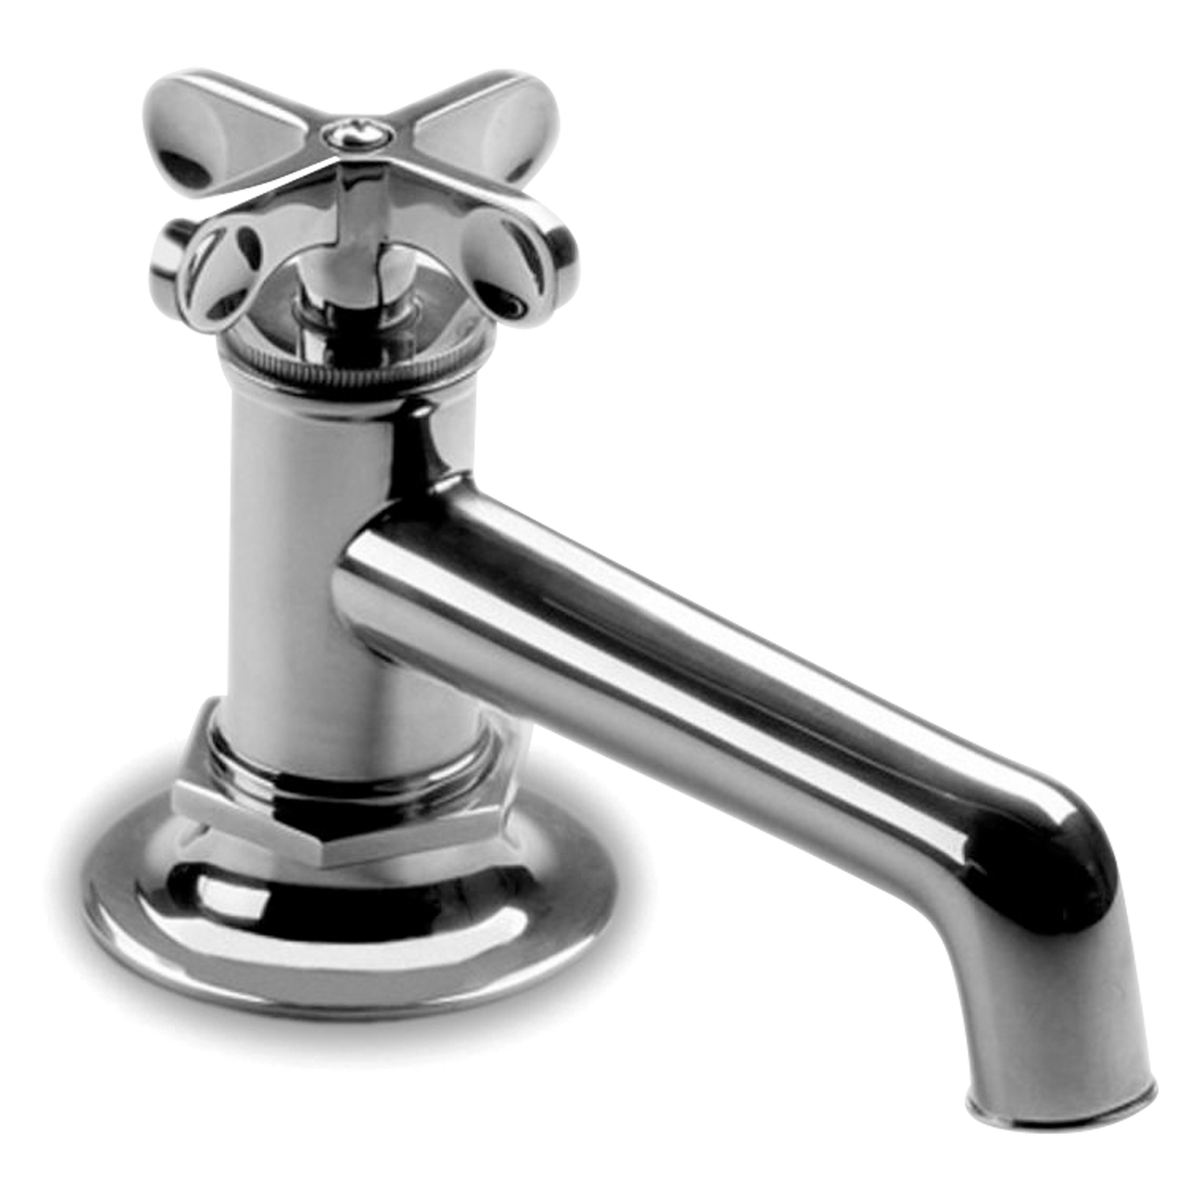 Henry Faucet